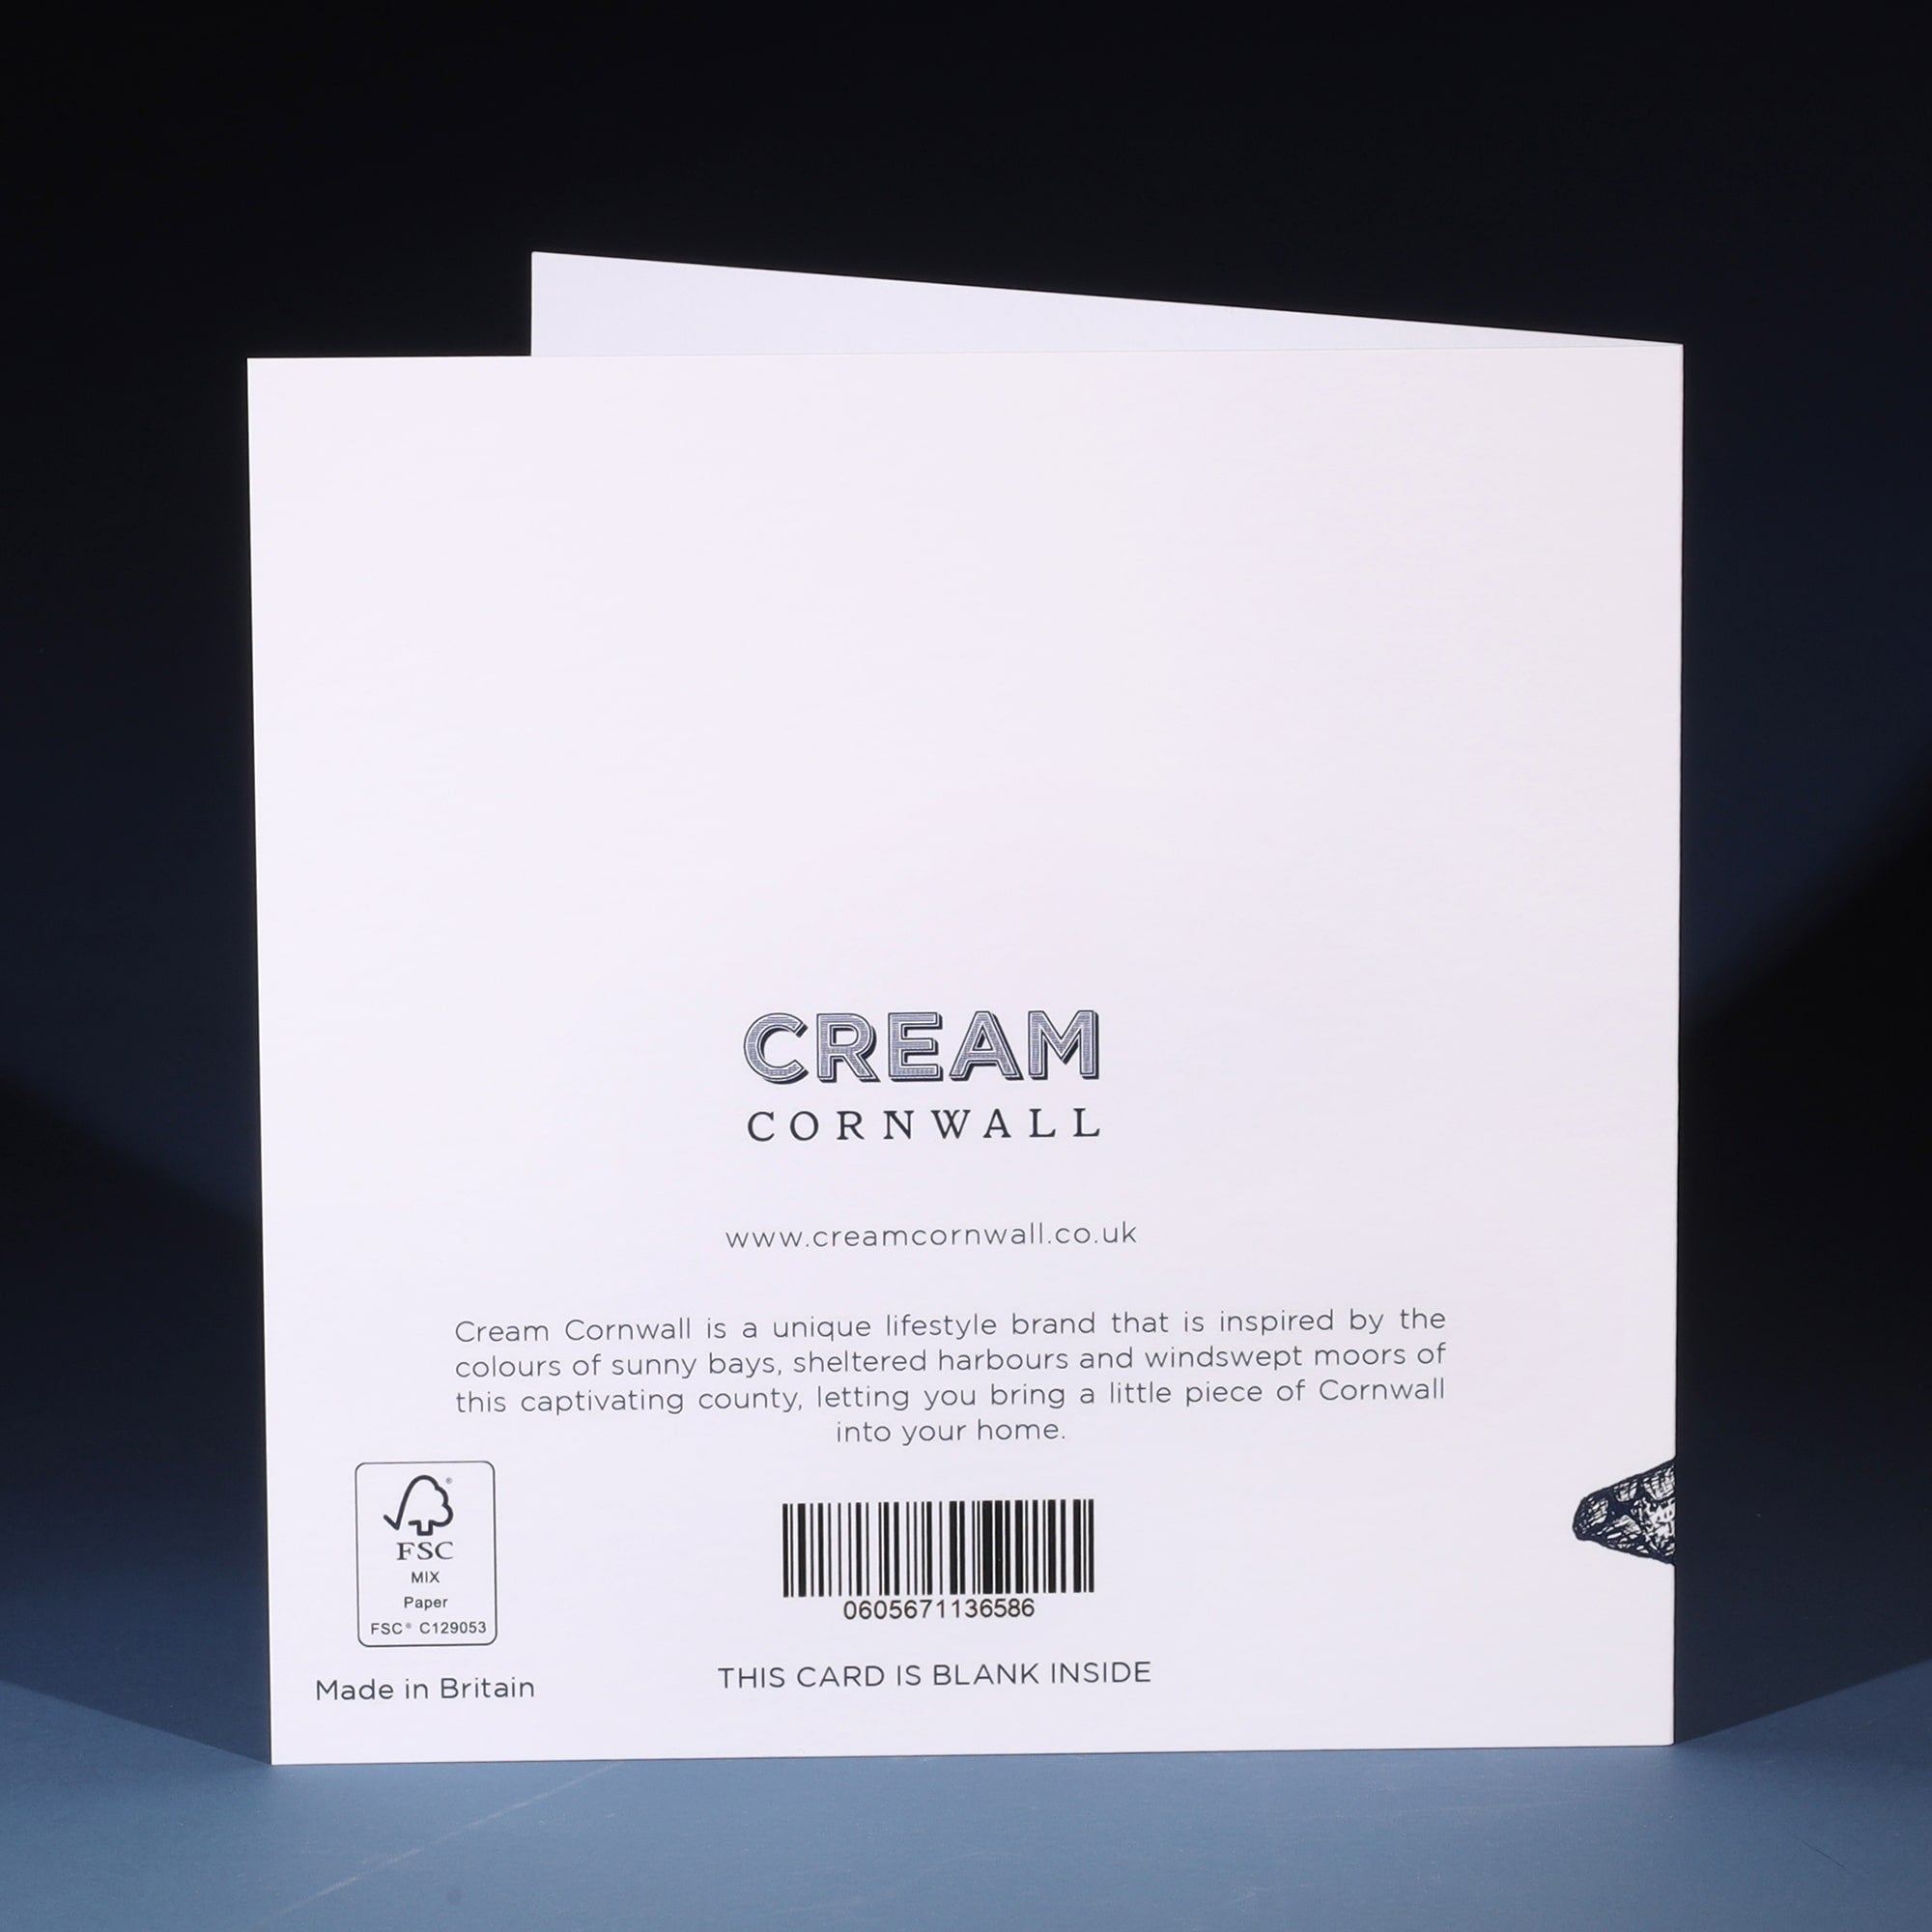 Back of greeting card with all the details about Cream Cornwall.